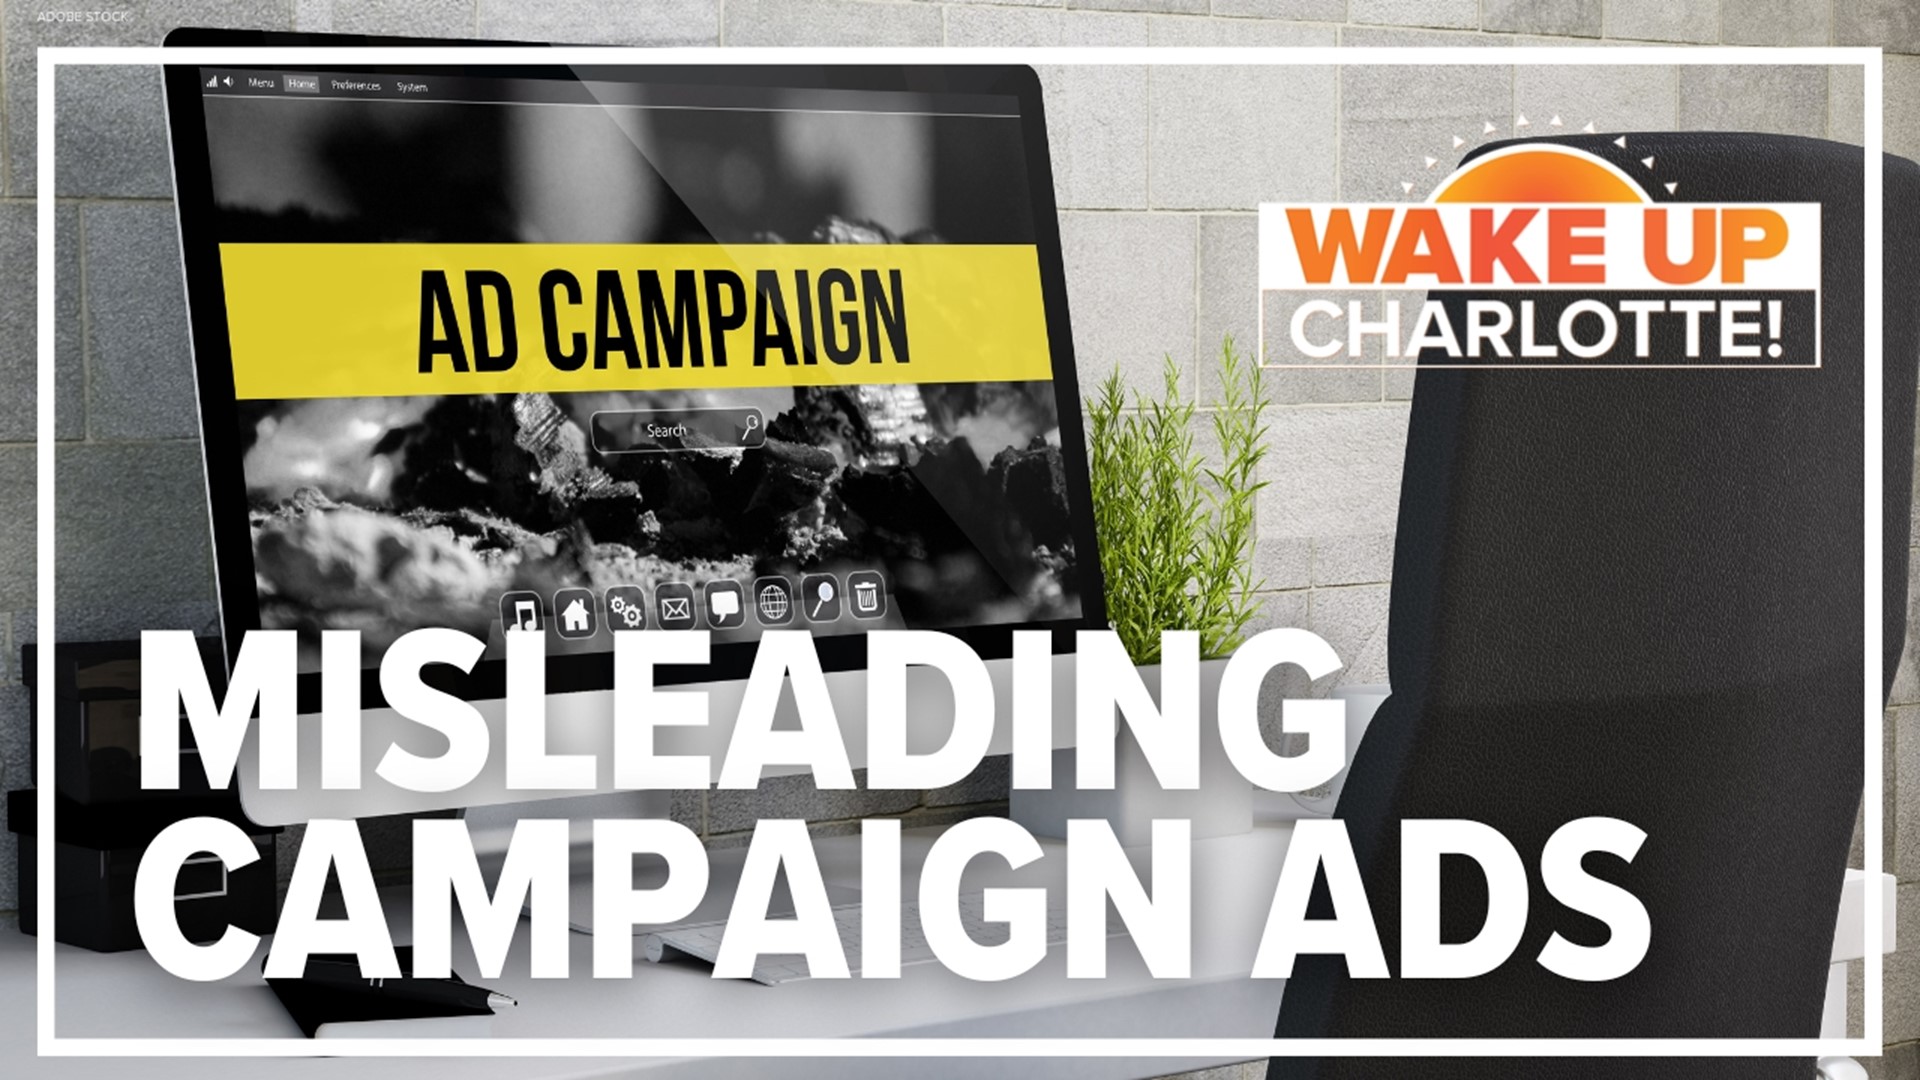 Some people are wondering why TV stations run political ads that appear to be misleading. The VERIFY team explains why these ads appear on TV.